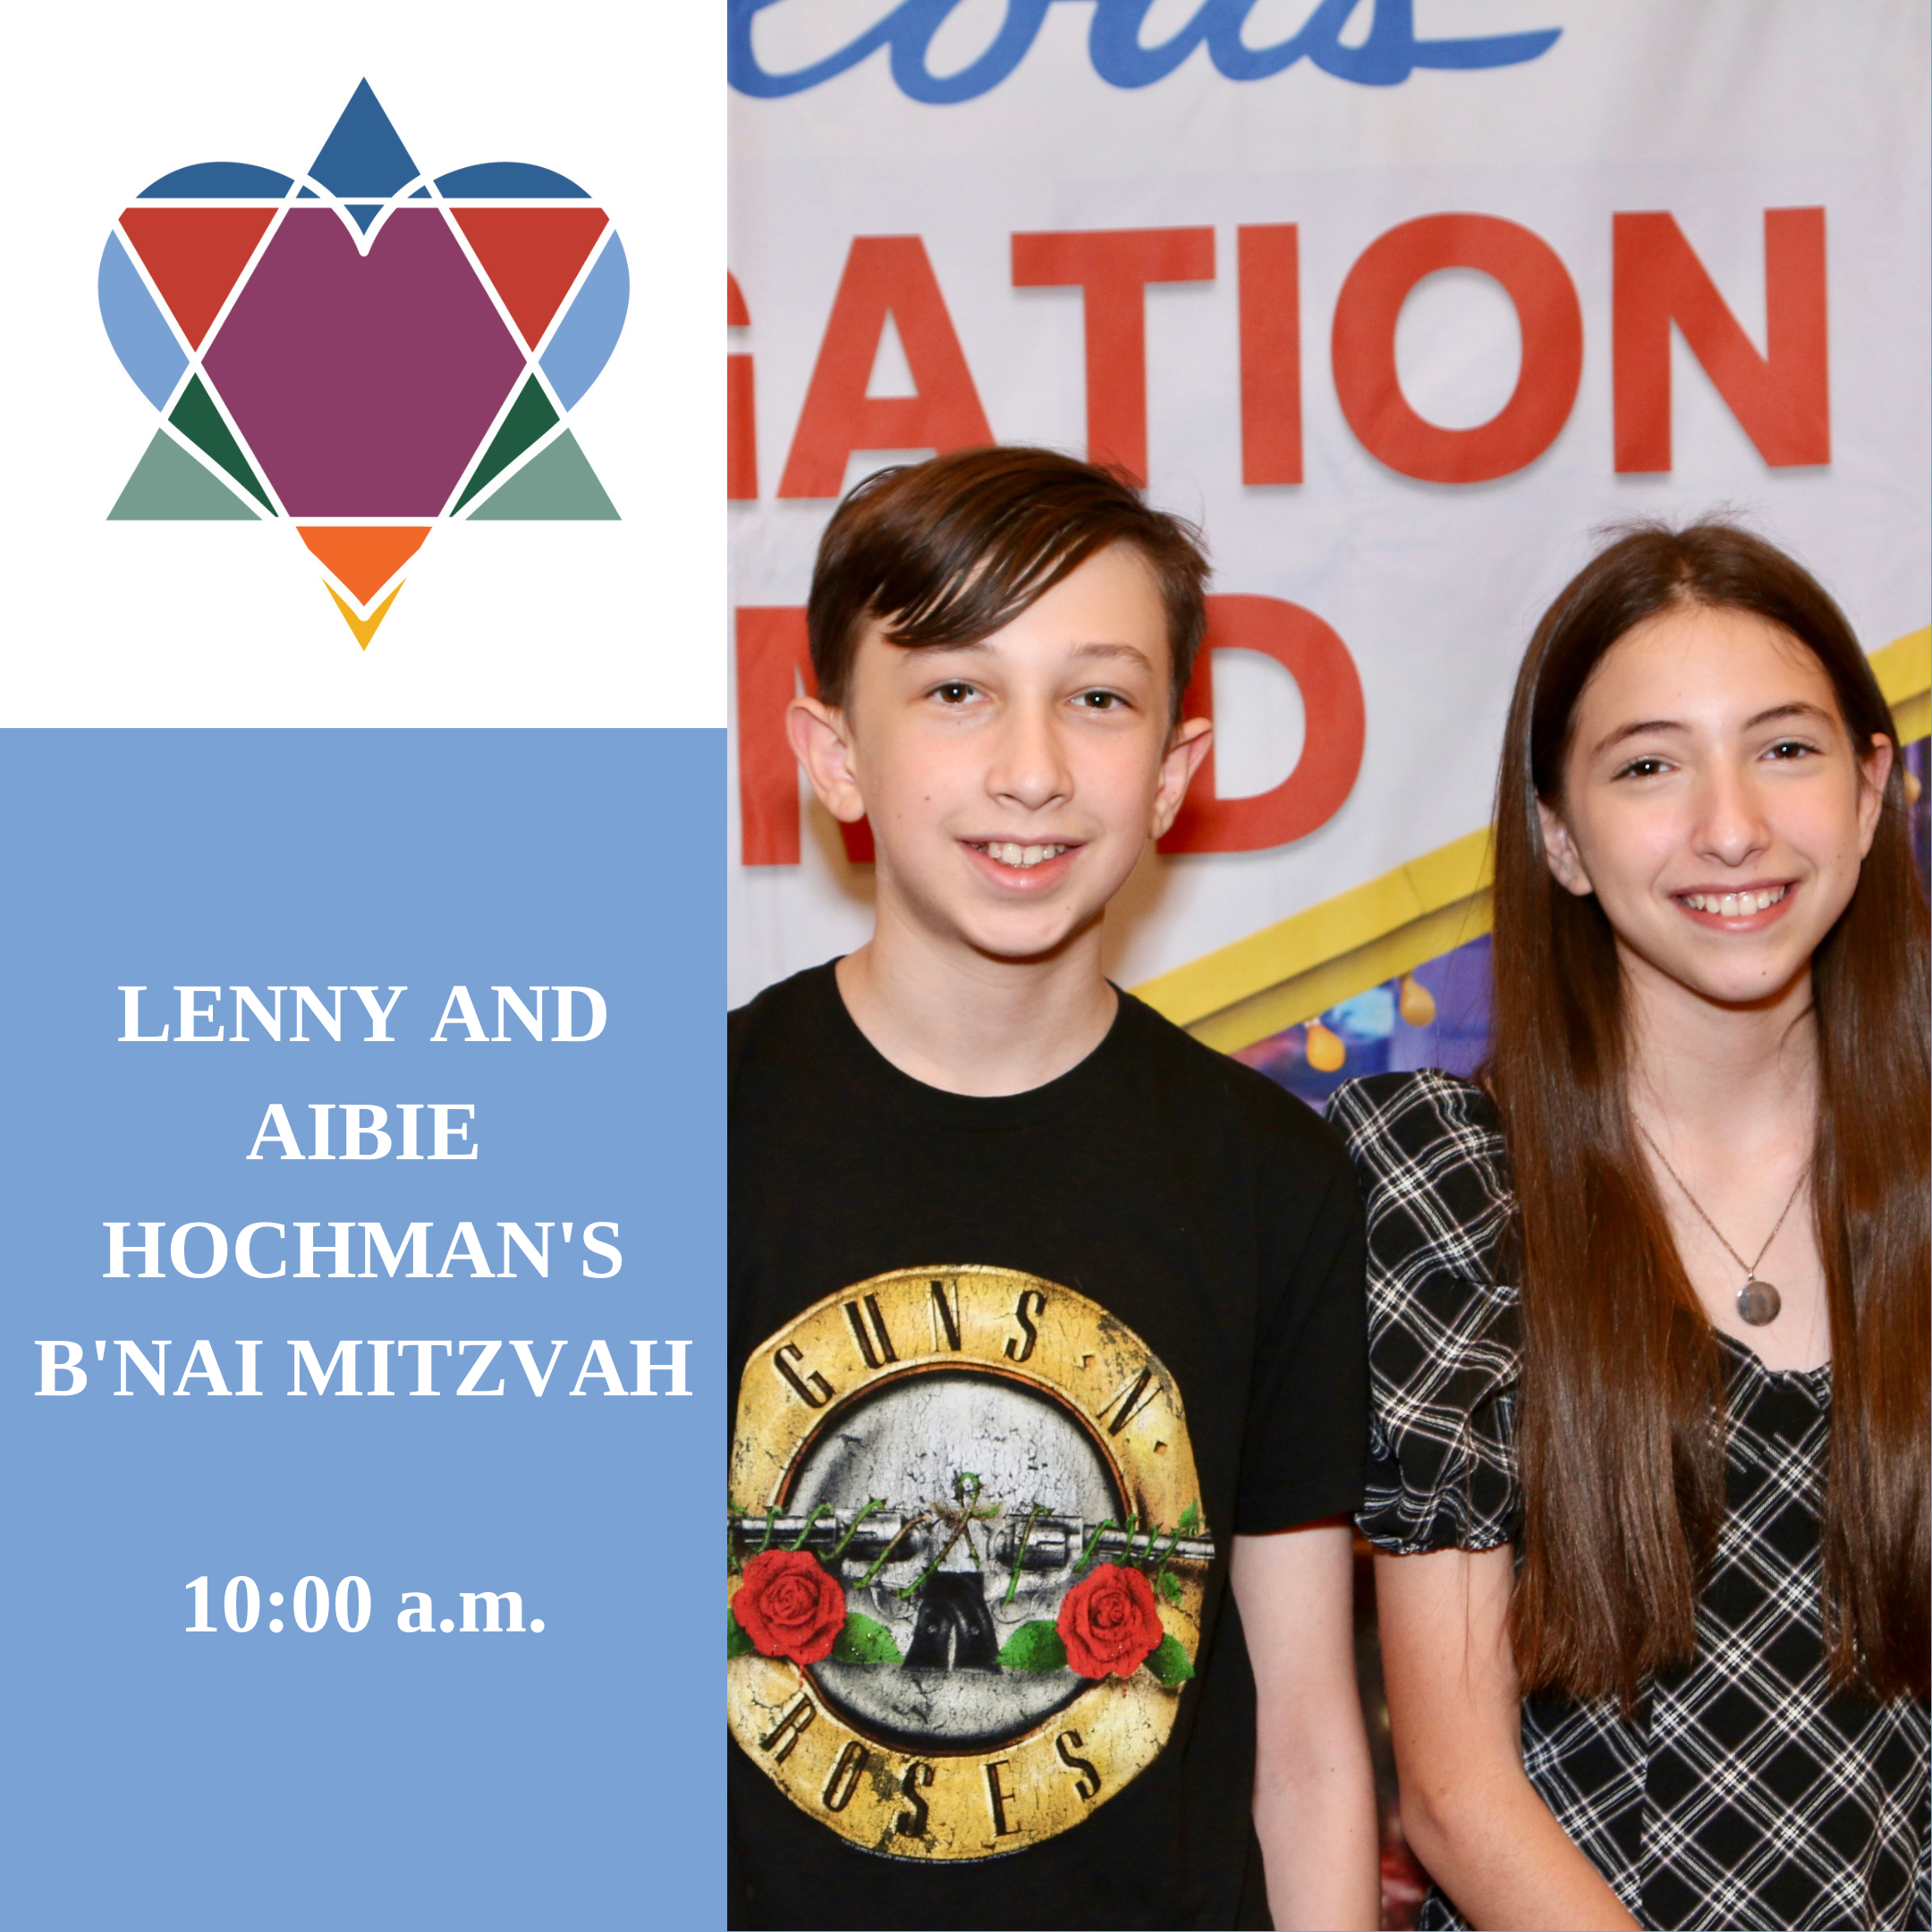 LENNY AND AIBIE HOCHMAN’S B’NAI MITZVAH